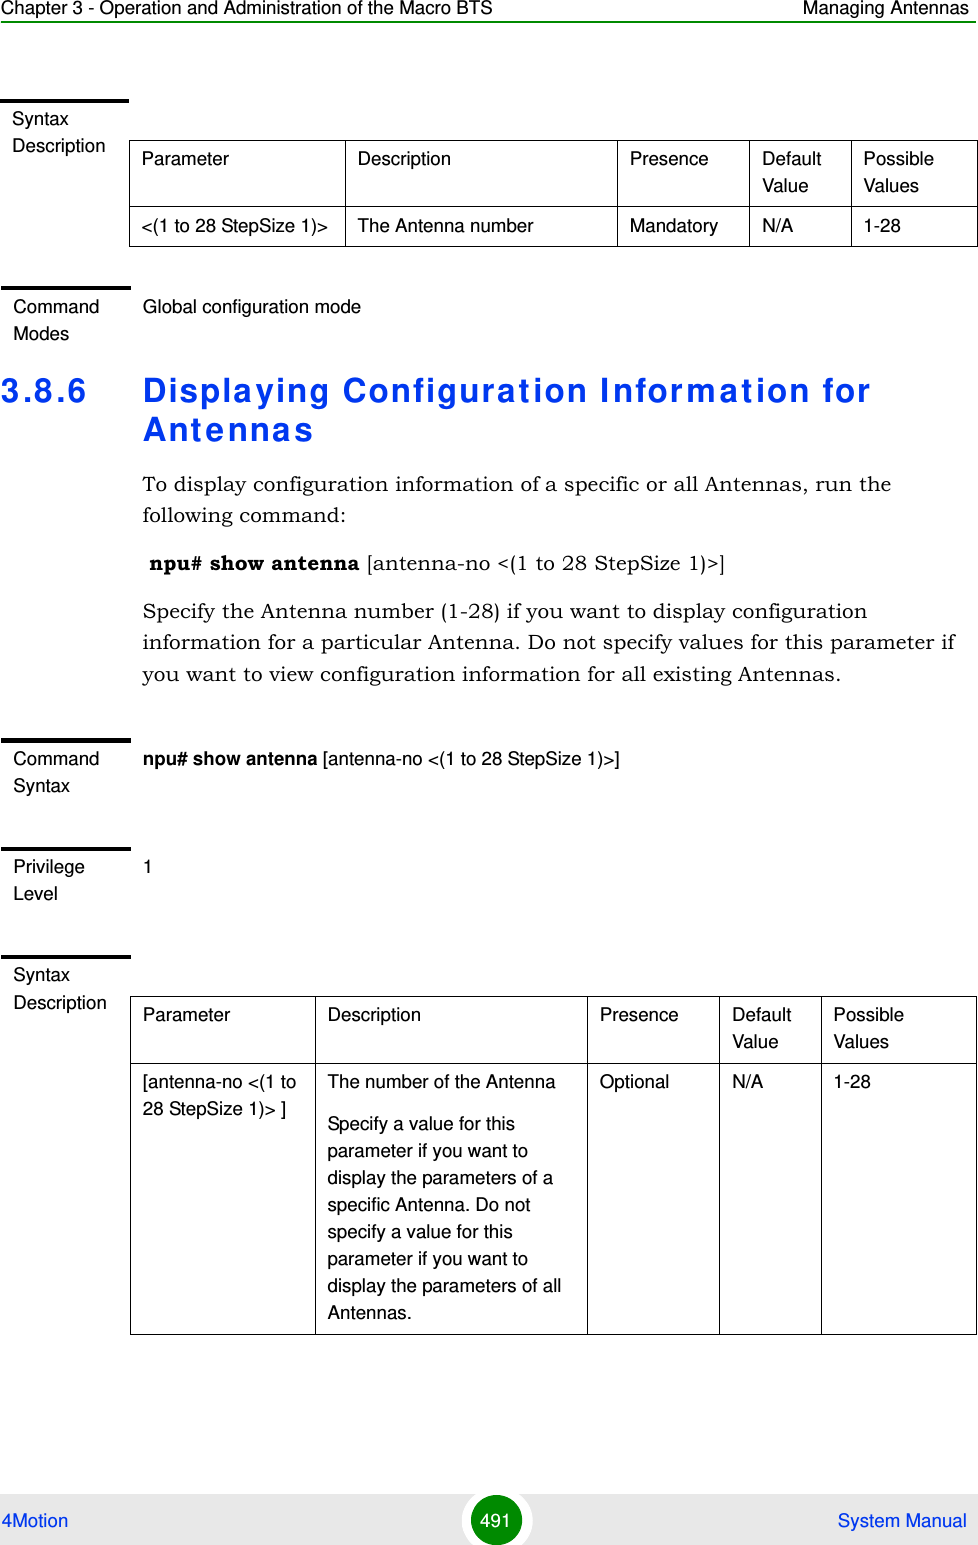 Chapter 3 - Operation and Administration of the Macro BTS Managing Antennas4Motion 491  System Manual3.8 .6 Displa ying Configurat ion I nformation for AntennasTo display configuration information of a specific or all Antennas, run the following command: npu# show antenna [antenna-no &lt;(1 to 28 StepSize 1)&gt;]Specify the Antenna number (1-28) if you want to display configuration information for a particular Antenna. Do not specify values for this parameter if you want to view configuration information for all existing Antennas.Syntax Description Parameter Description Presence Default ValuePossible Values&lt;(1 to 28 StepSize 1)&gt; The Antenna number  Mandatory N/A 1-28Command ModesGlobal configuration modeCommand Syntaxnpu# show antenna [antenna-no &lt;(1 to 28 StepSize 1)&gt;]Privilege Level1Syntax Description Parameter Description Presence Default ValuePossible Values[antenna-no &lt;(1 to 28 StepSize 1)&gt; ]The number of the Antenna Specify a value for this parameter if you want to display the parameters of a specific Antenna. Do not specify a value for this parameter if you want to display the parameters of all Antennas.Optional N/A 1-28